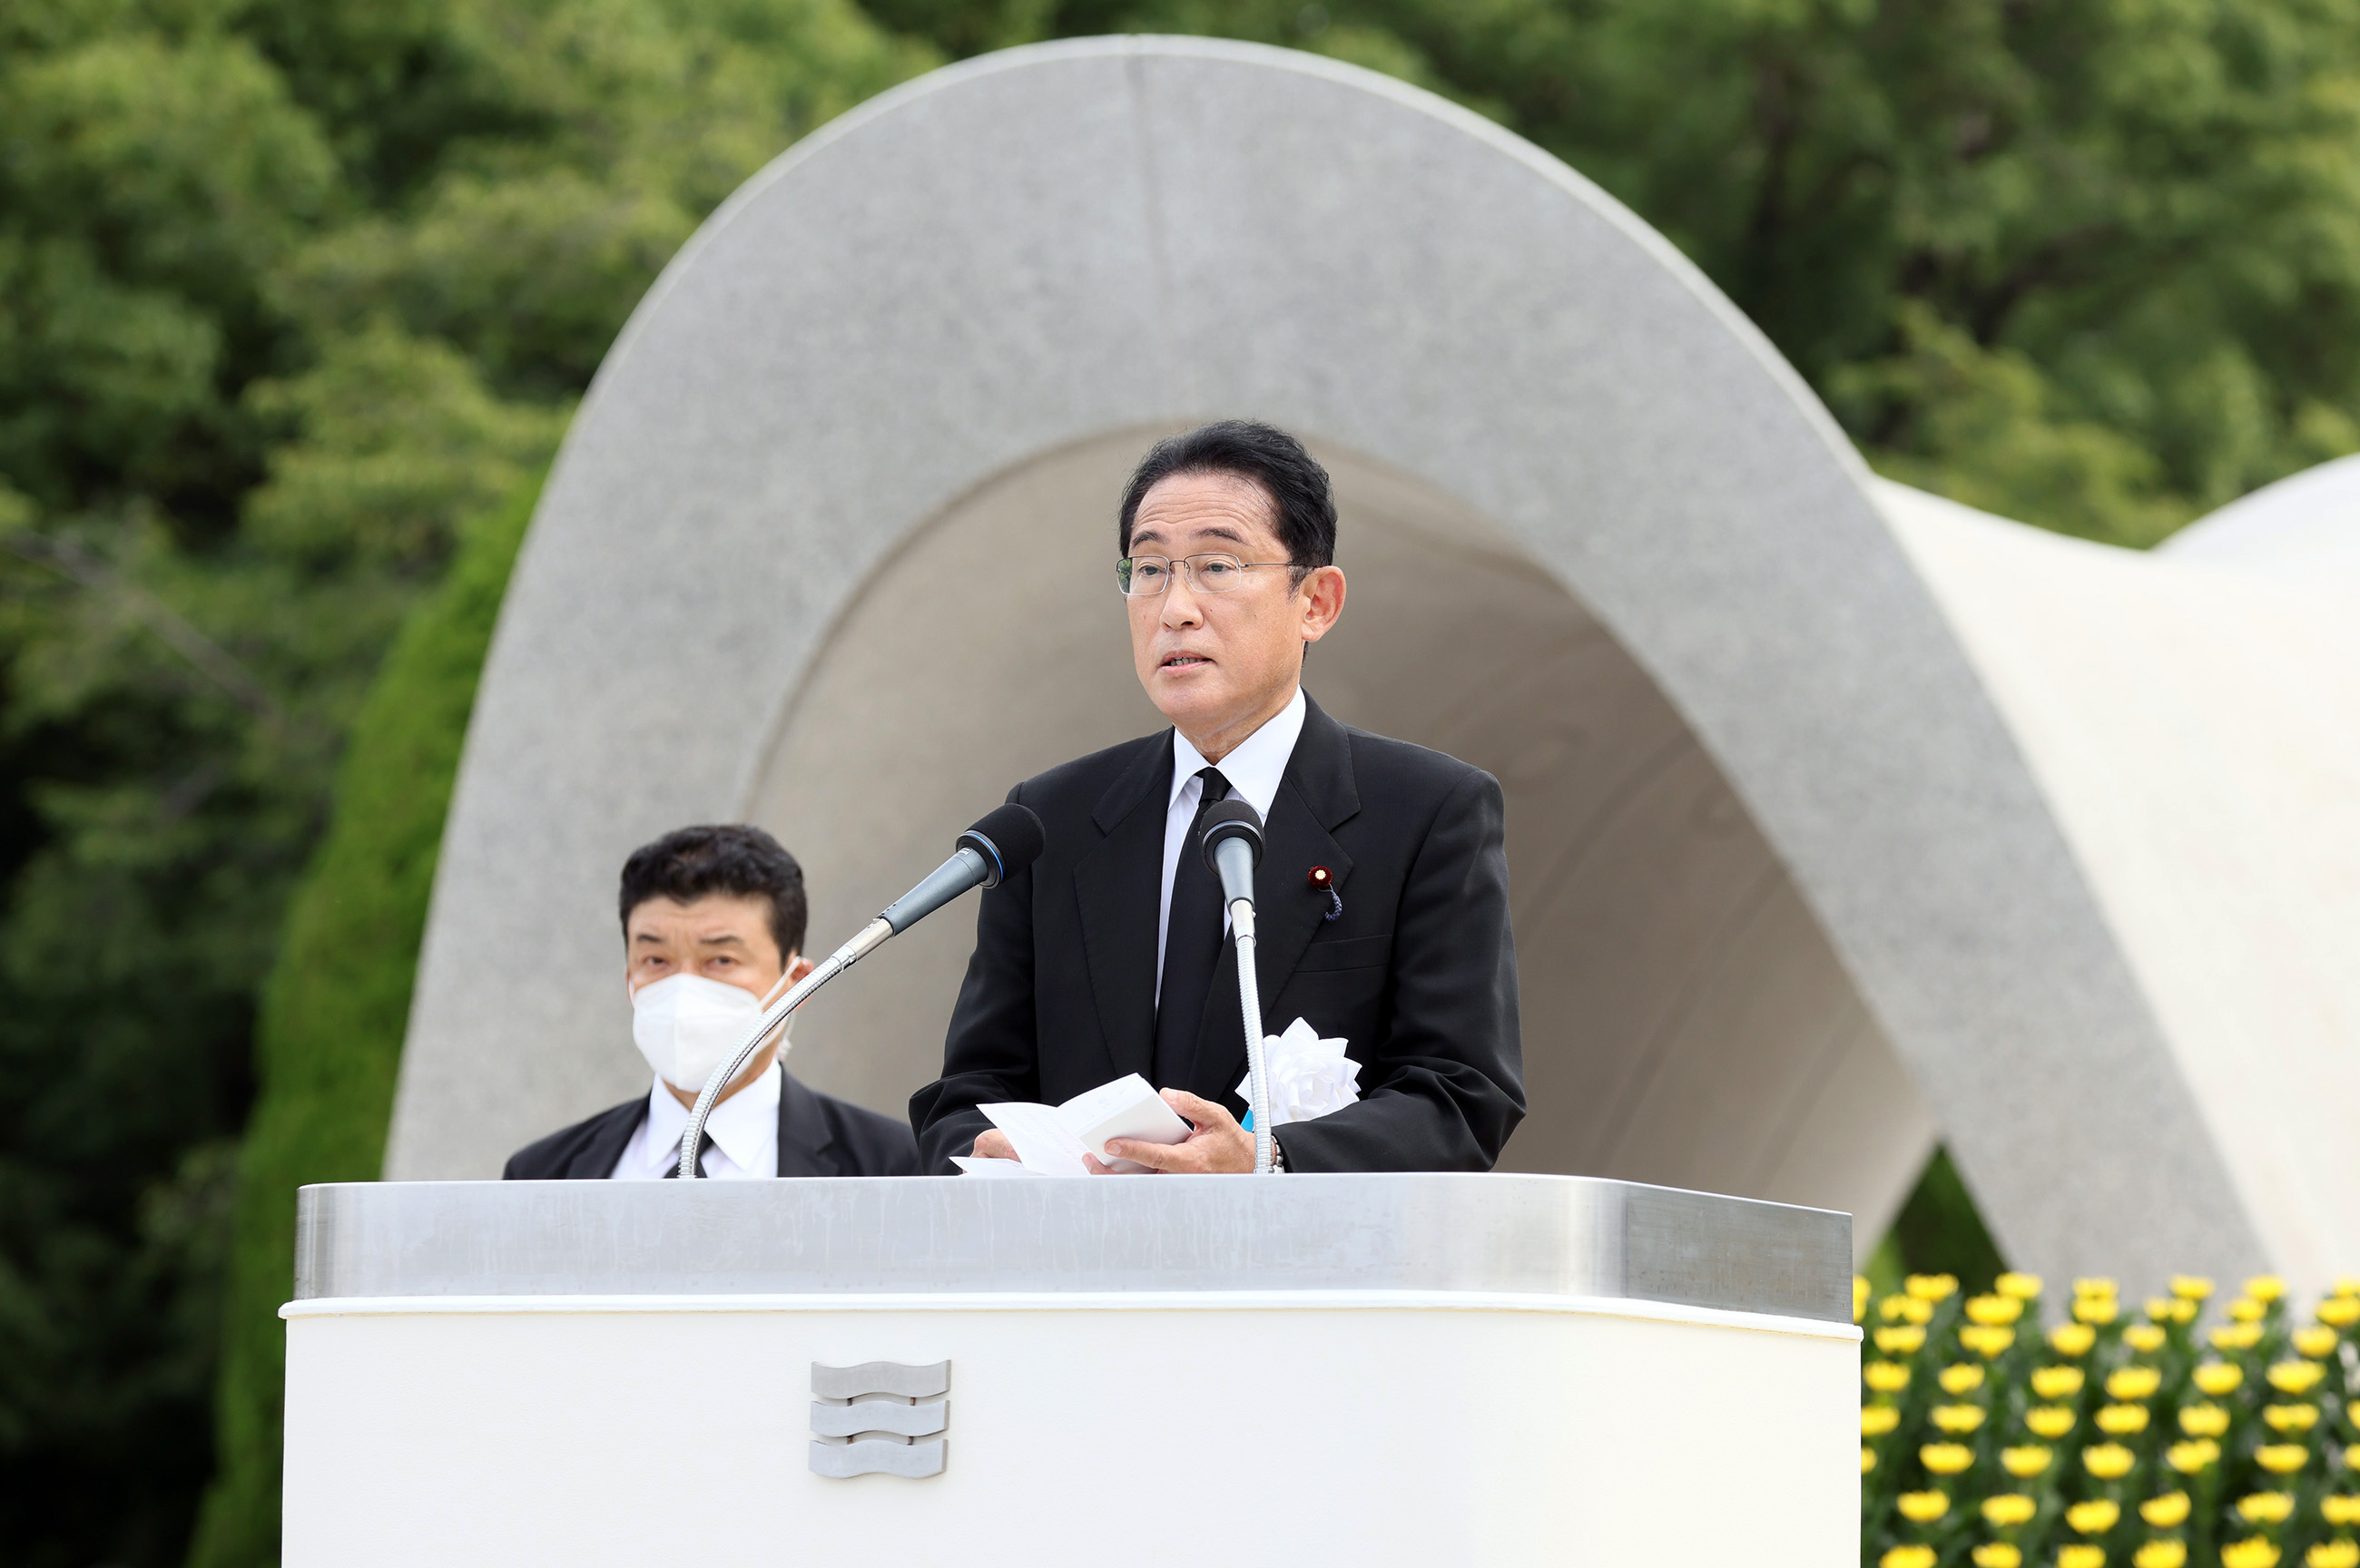 Hiroshima Peace Memorial Ceremony and Other Events